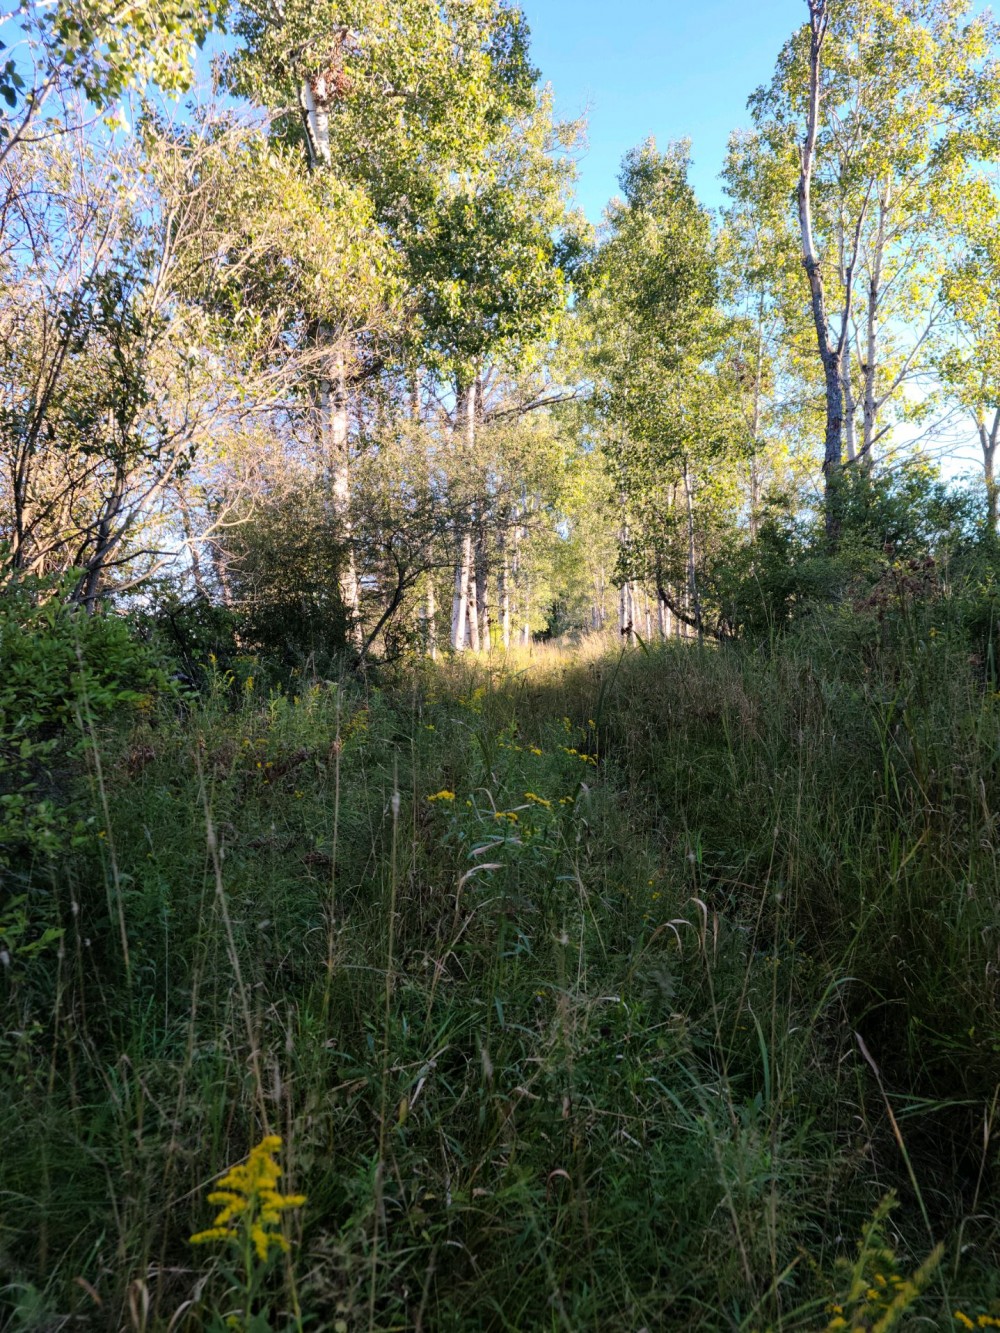 Awesome hunting experience on this an active 160 acre farm - Reed City, MIchigan featured image